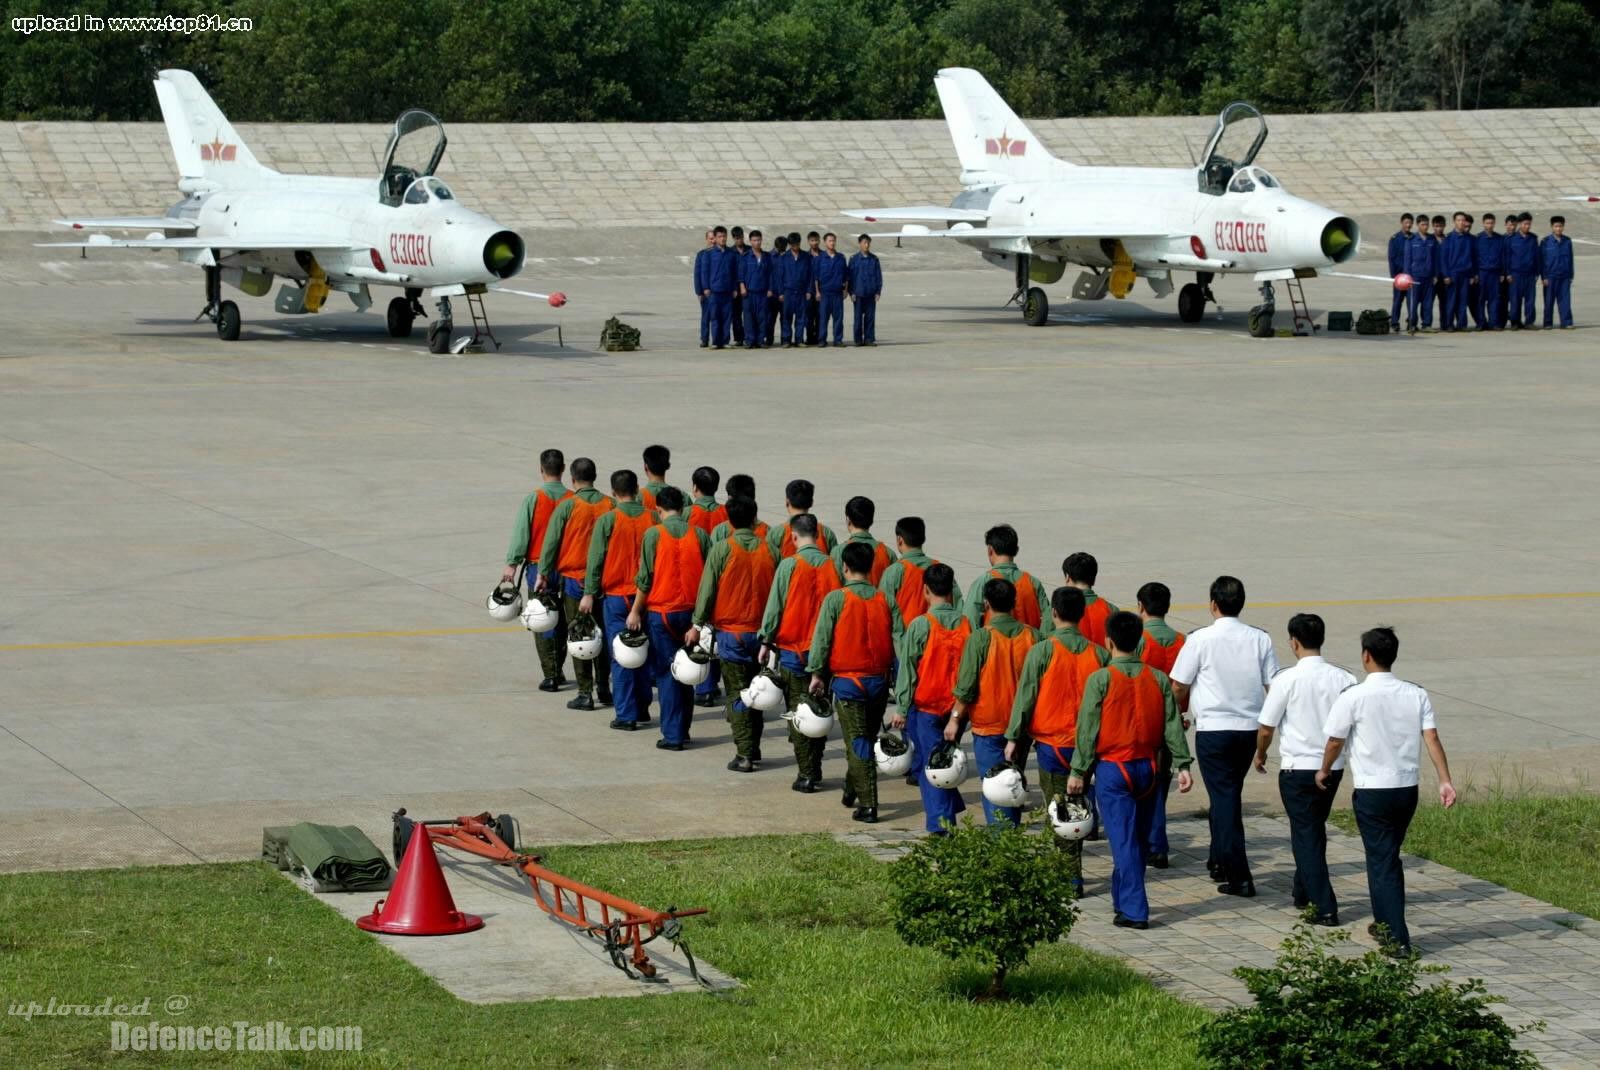 J-7 Fishbed - Chinese Air Force